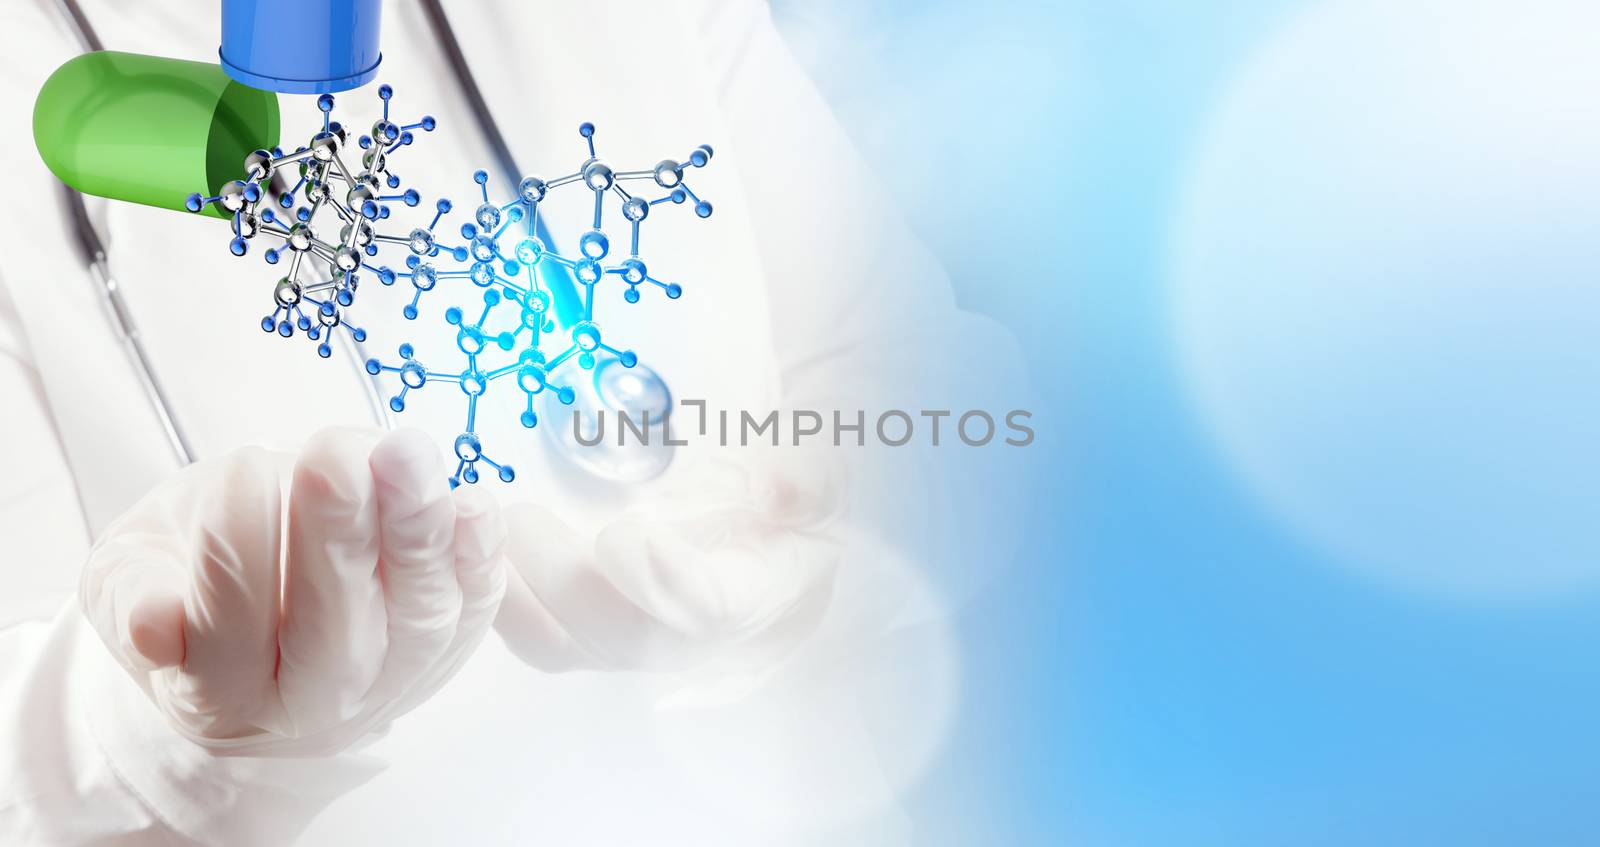 scientist doctor hand holds virtual molecular structure in the lab as concept 